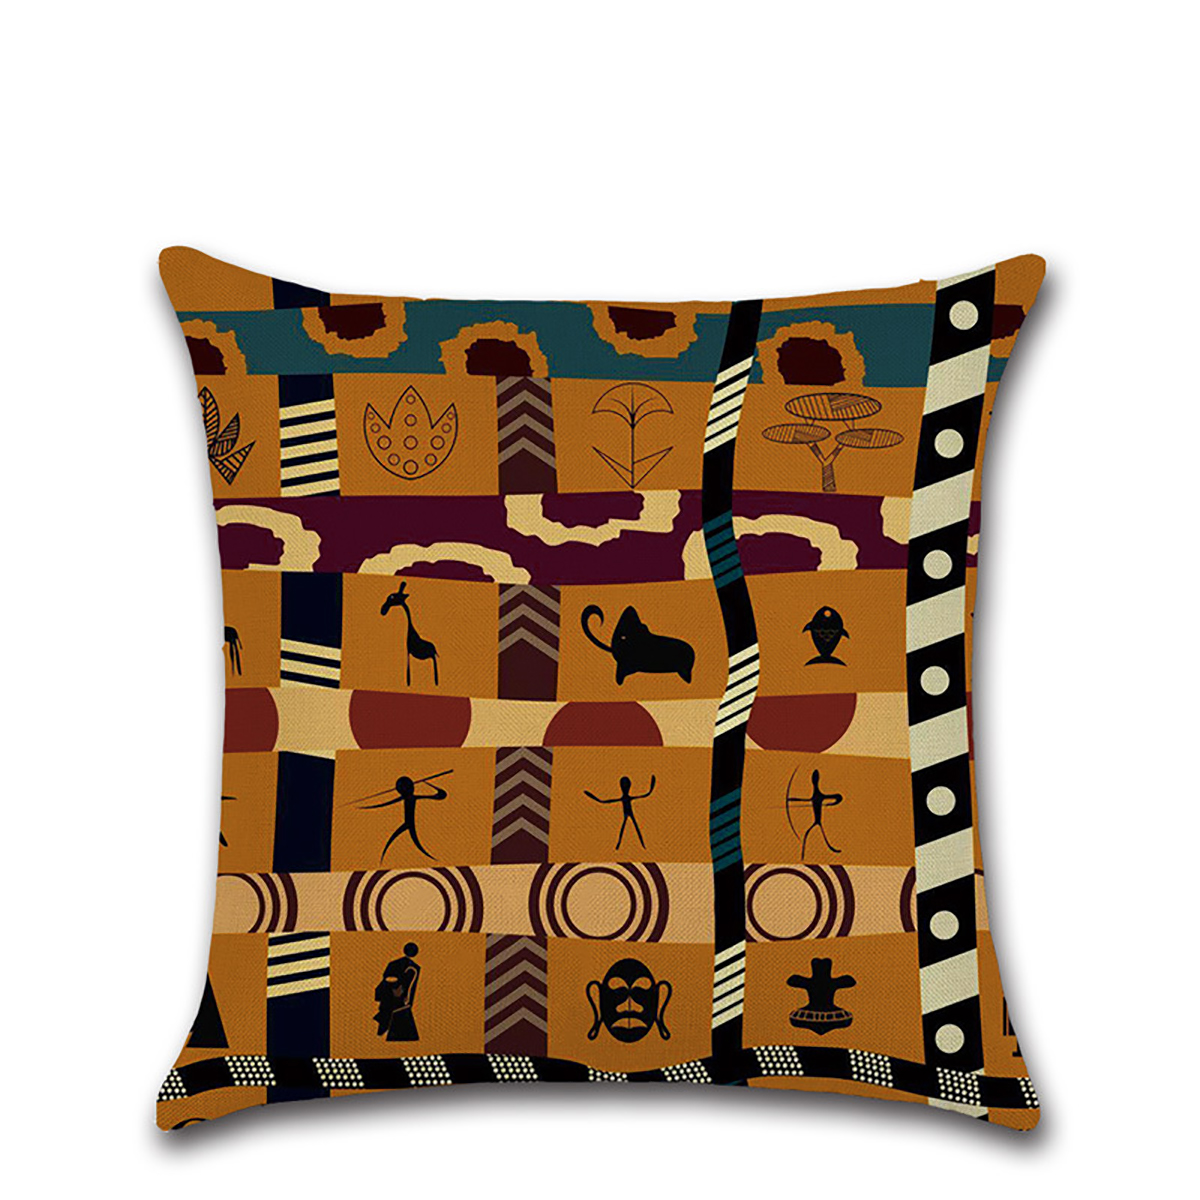 45x45CM-African-National-Style-Geometric-Printing-Cushion-Cover-Linen-Pillow-Case-Home-Decor-Pillow--1915524-5